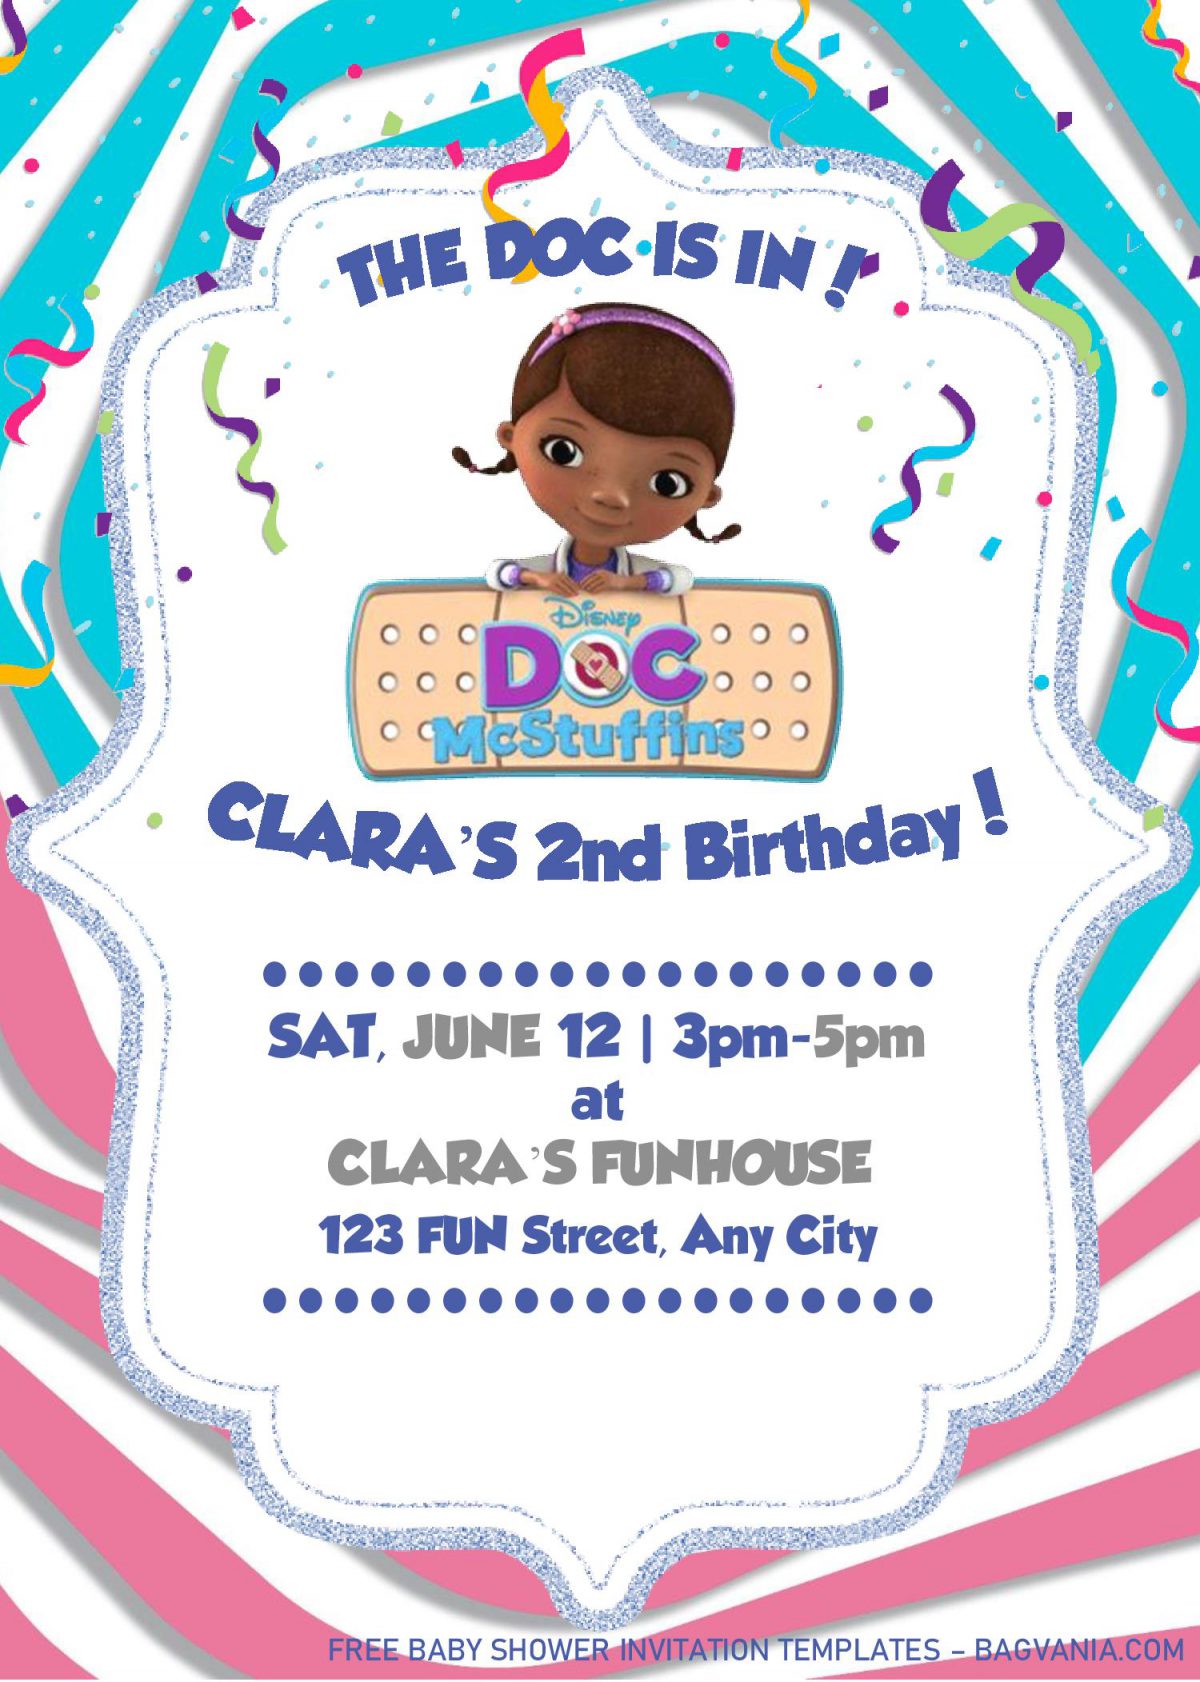 Doc McStuffins Birthday Invitation Templates - Editable With MS Word and has colorful confetti